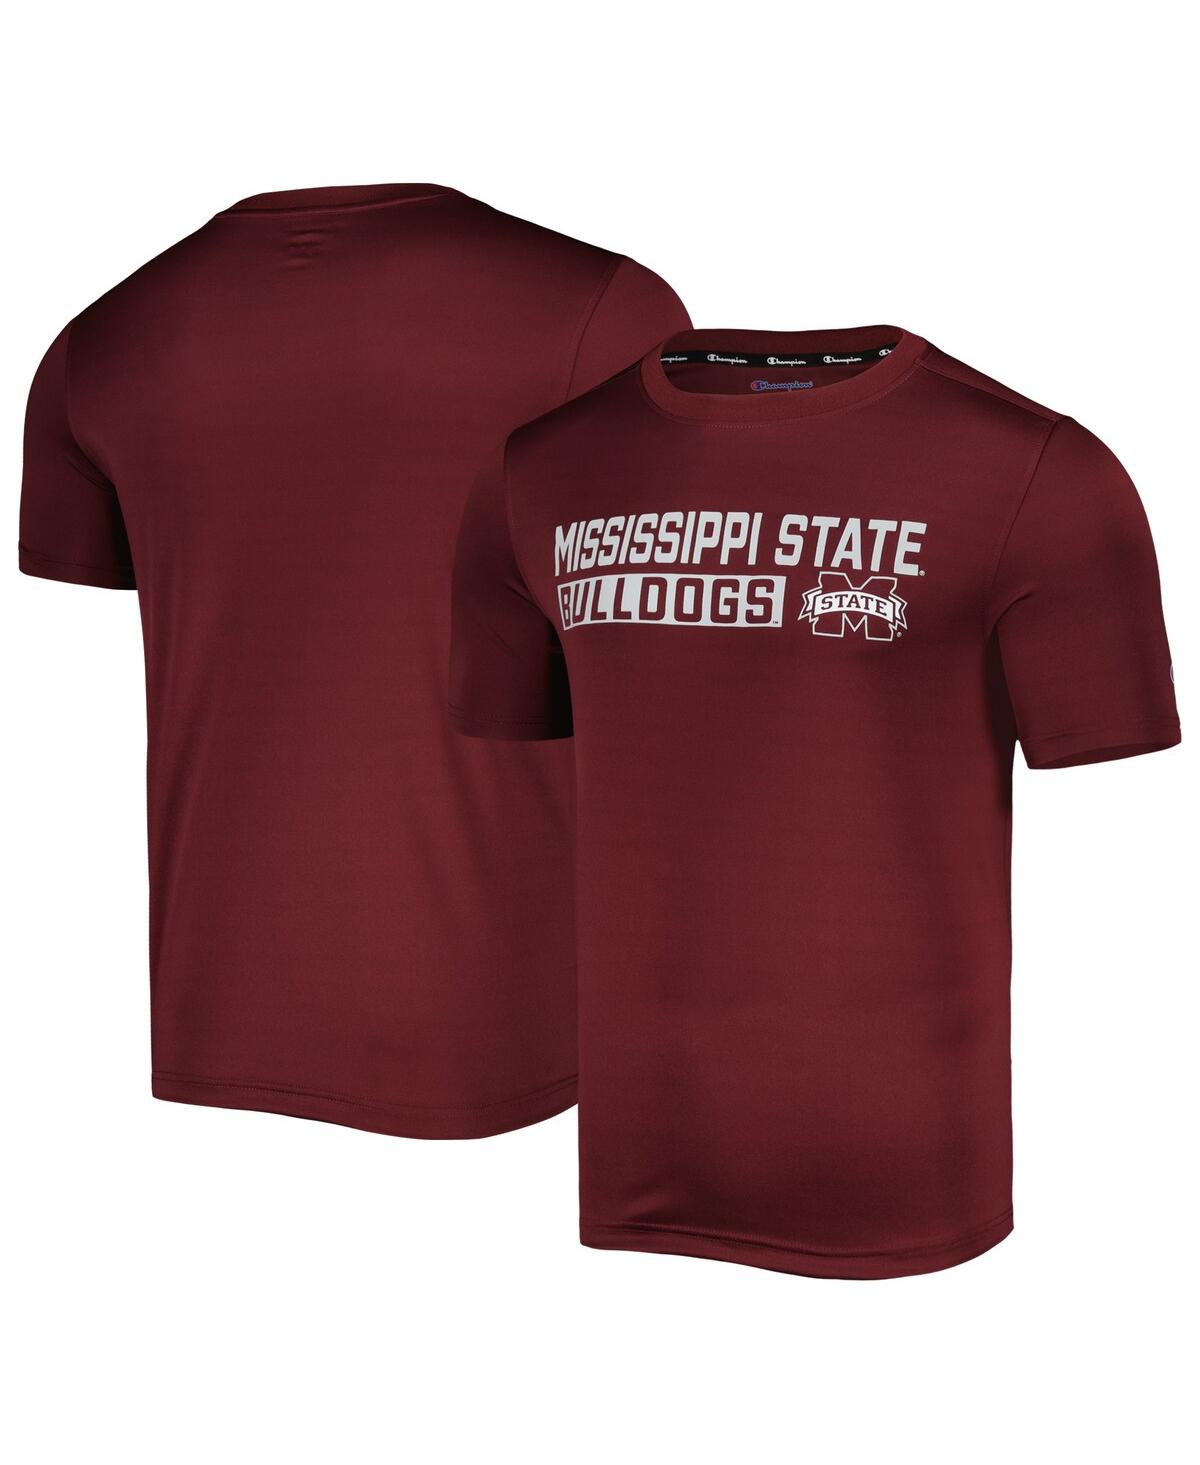 CHAMPION MEN'S CHAMPION MAROON MISSISSIPPI STATE BULLDOGS IMPACT KNOCKOUT T-SHIRT